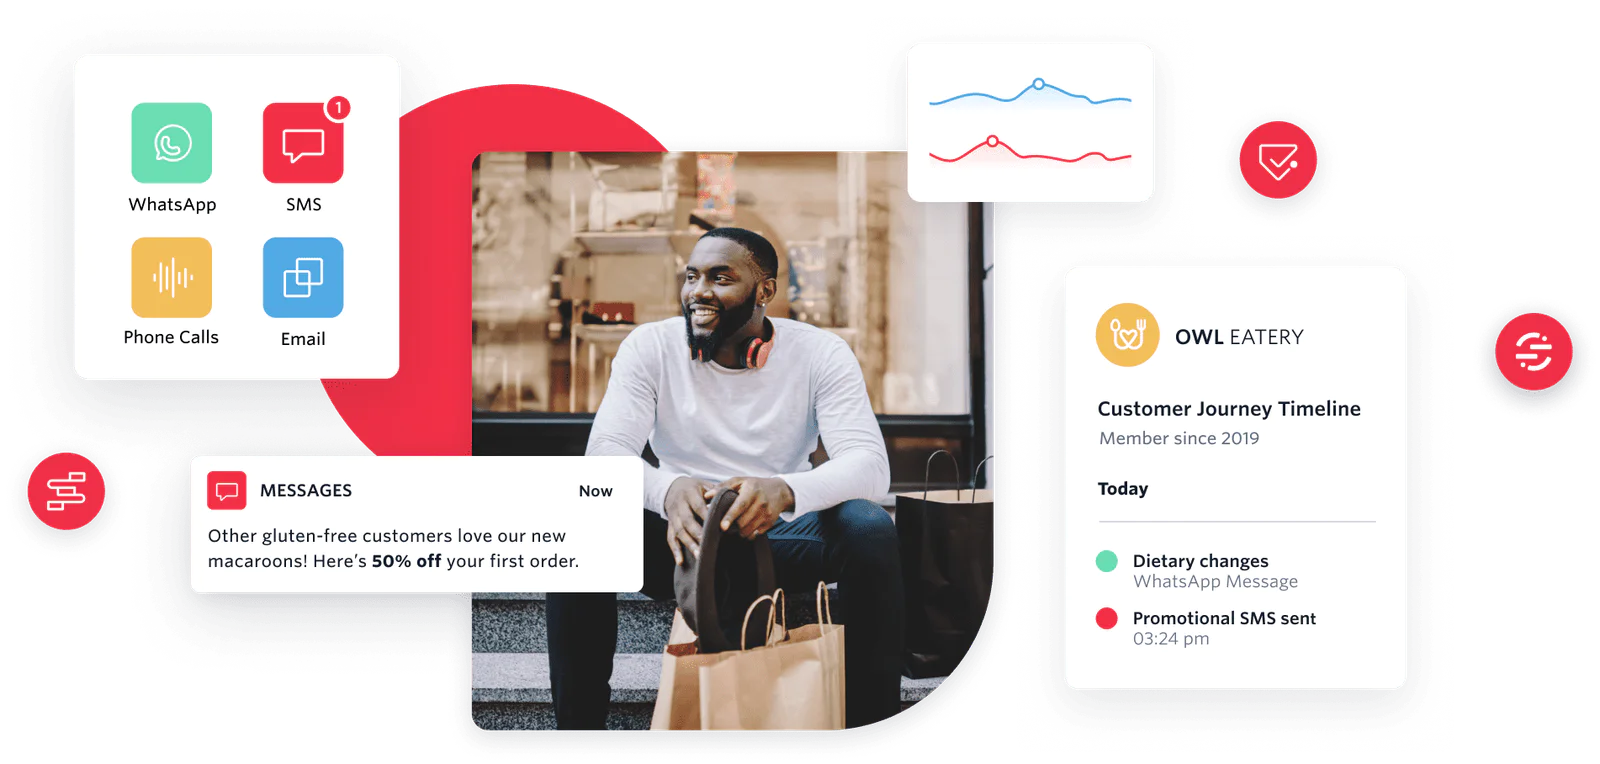 Twilio products working together to improve customer experience